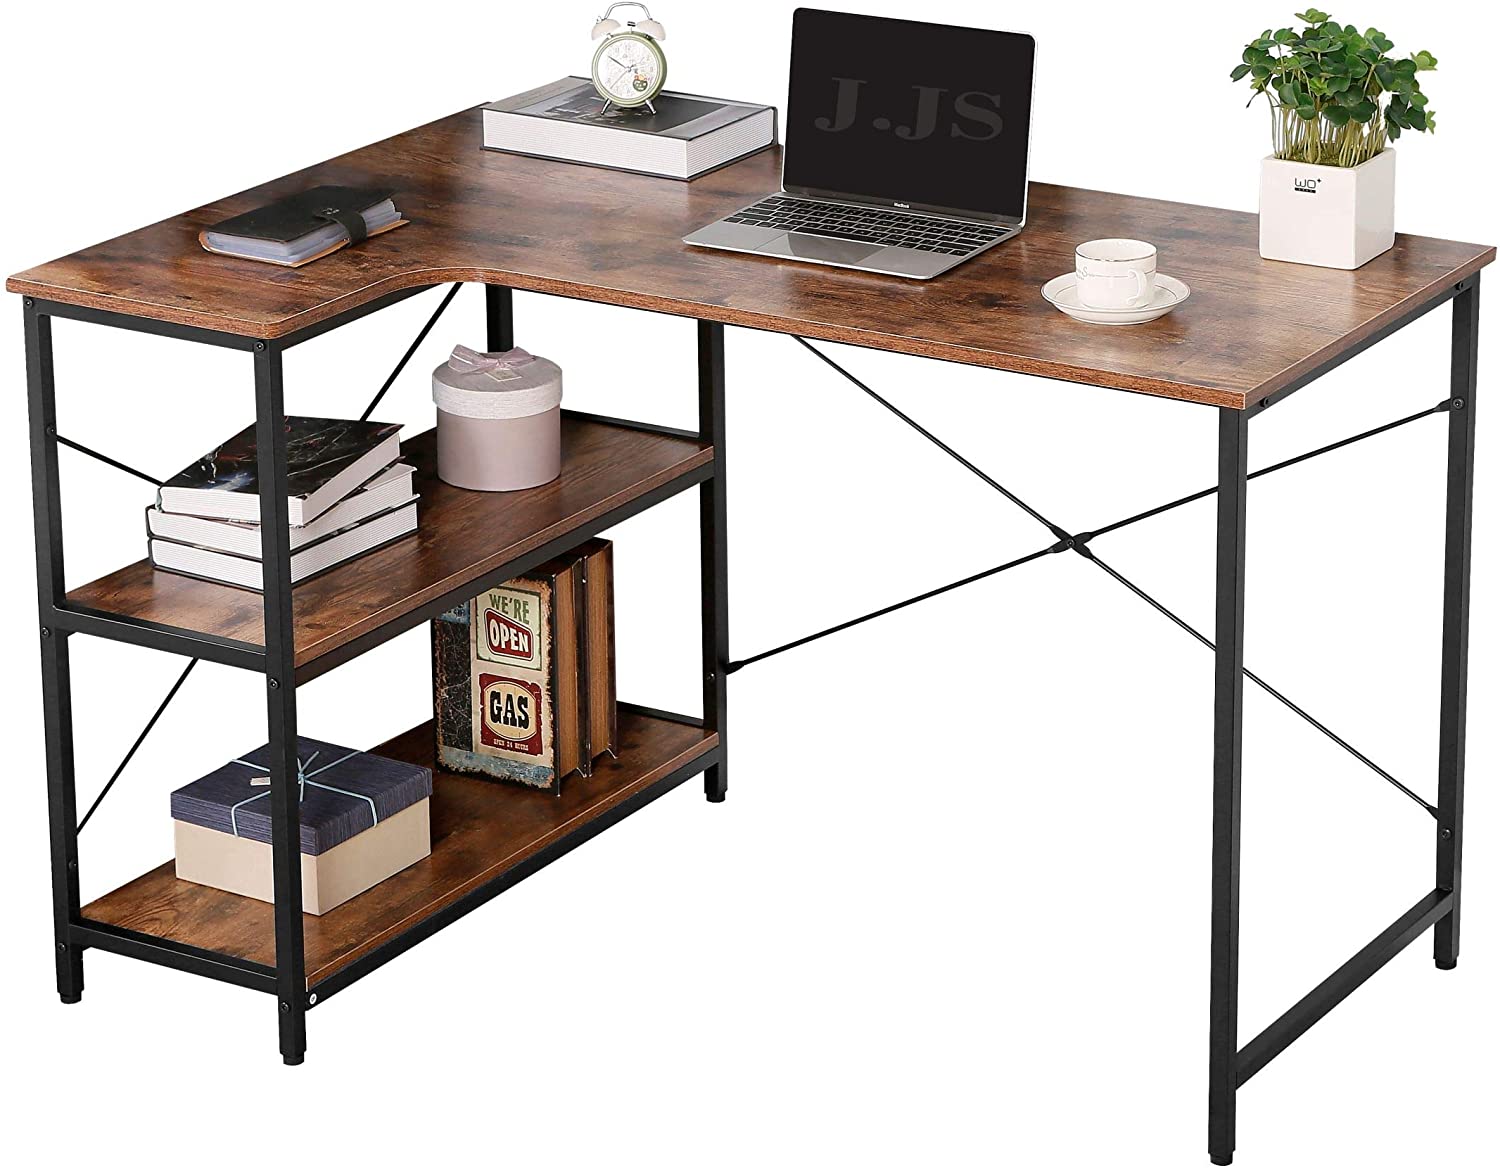 JJS L-Shaped Home Office Corner Writing Computer Desk with Build-in Bookcase